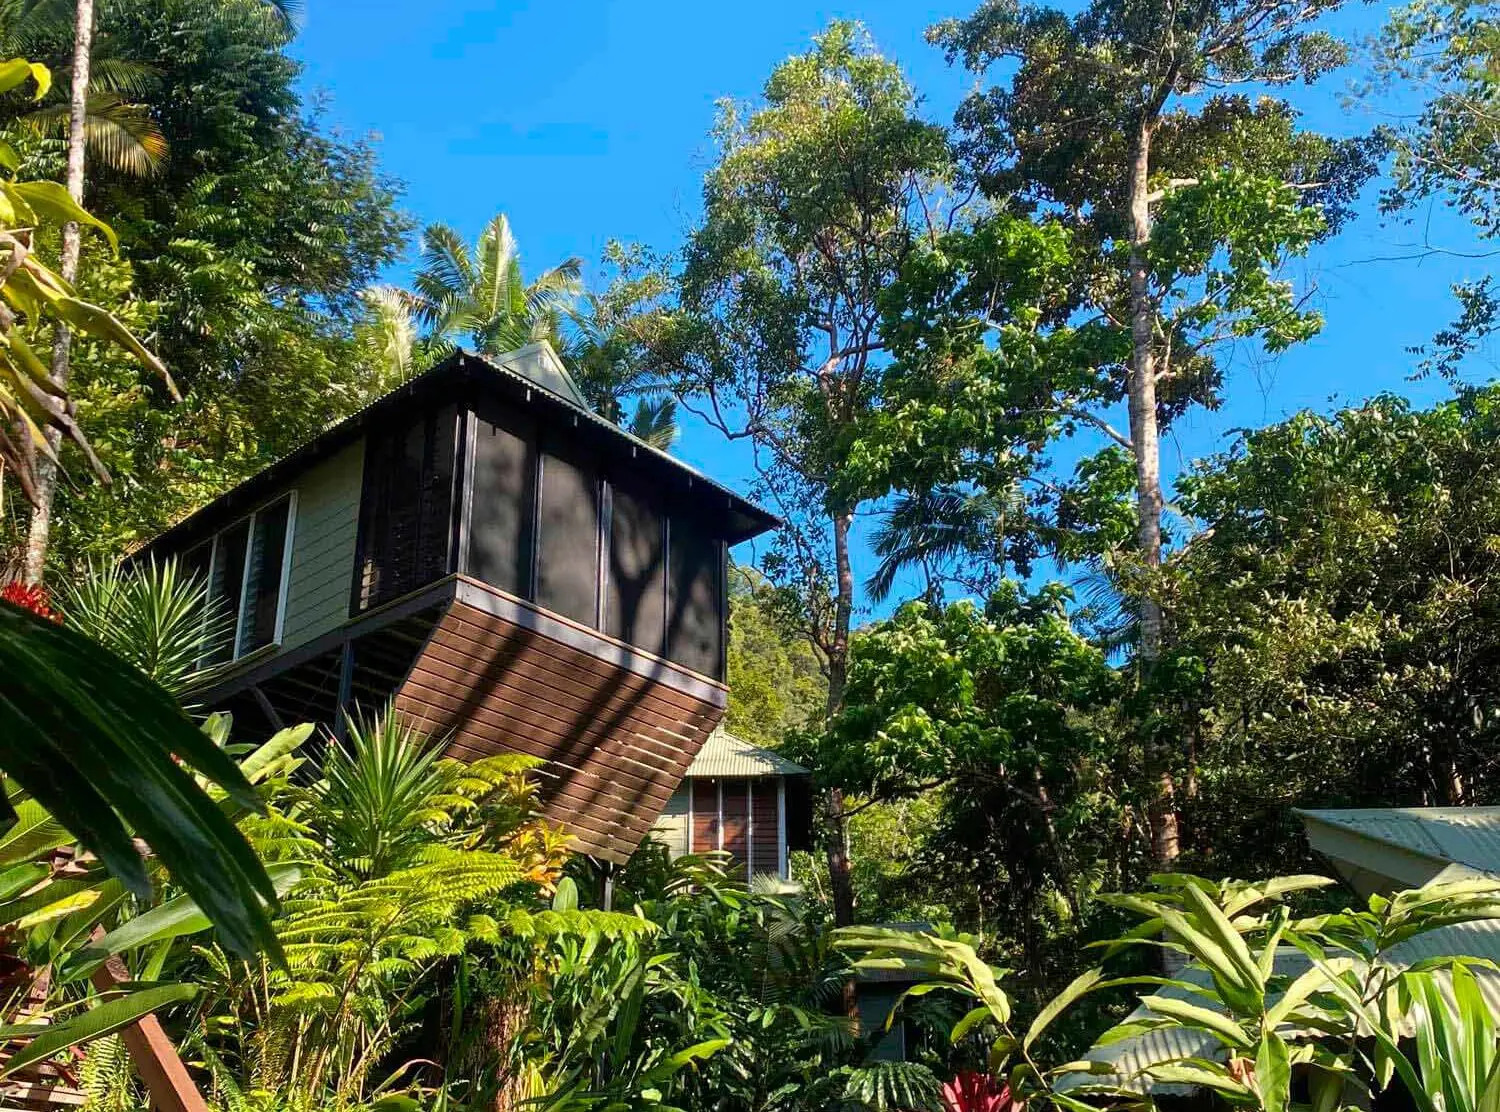 Daintree Ecolodge Who haven't ever dreamt of staying in a treehouse like this? Especially if it is a carbon neutral property with Greenfleet offsetting, meaning all carbon emissions are compensated for by funding native reforestation projects. All materials are recycled where possible and they are constantly exploring ways to improve on this. 